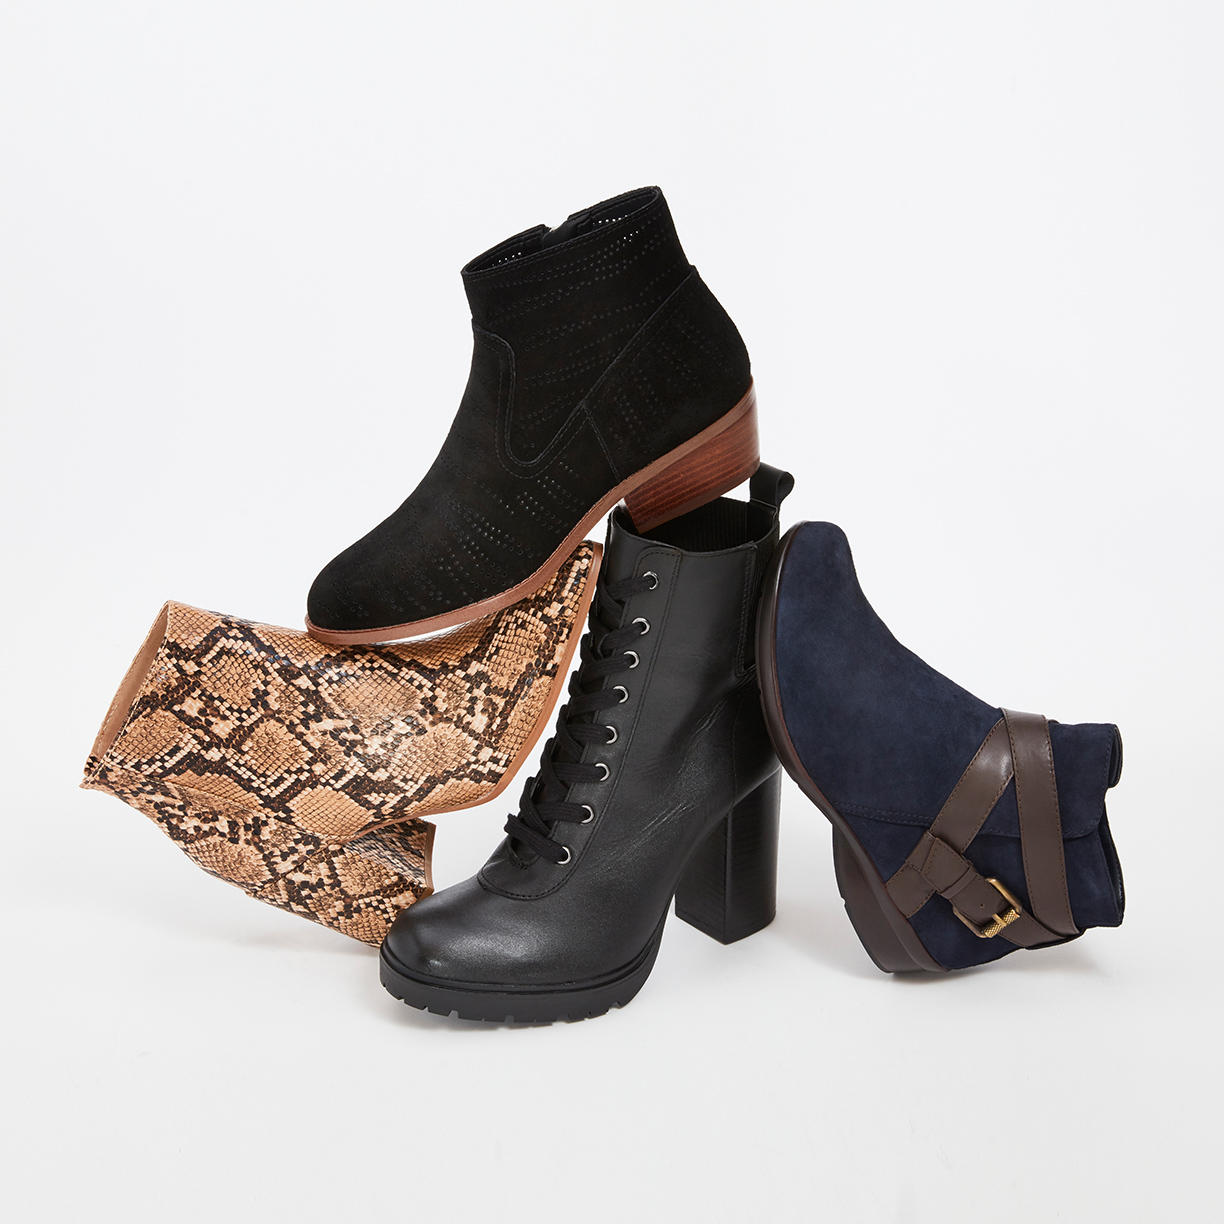 Booties for Chilly Summer Nights